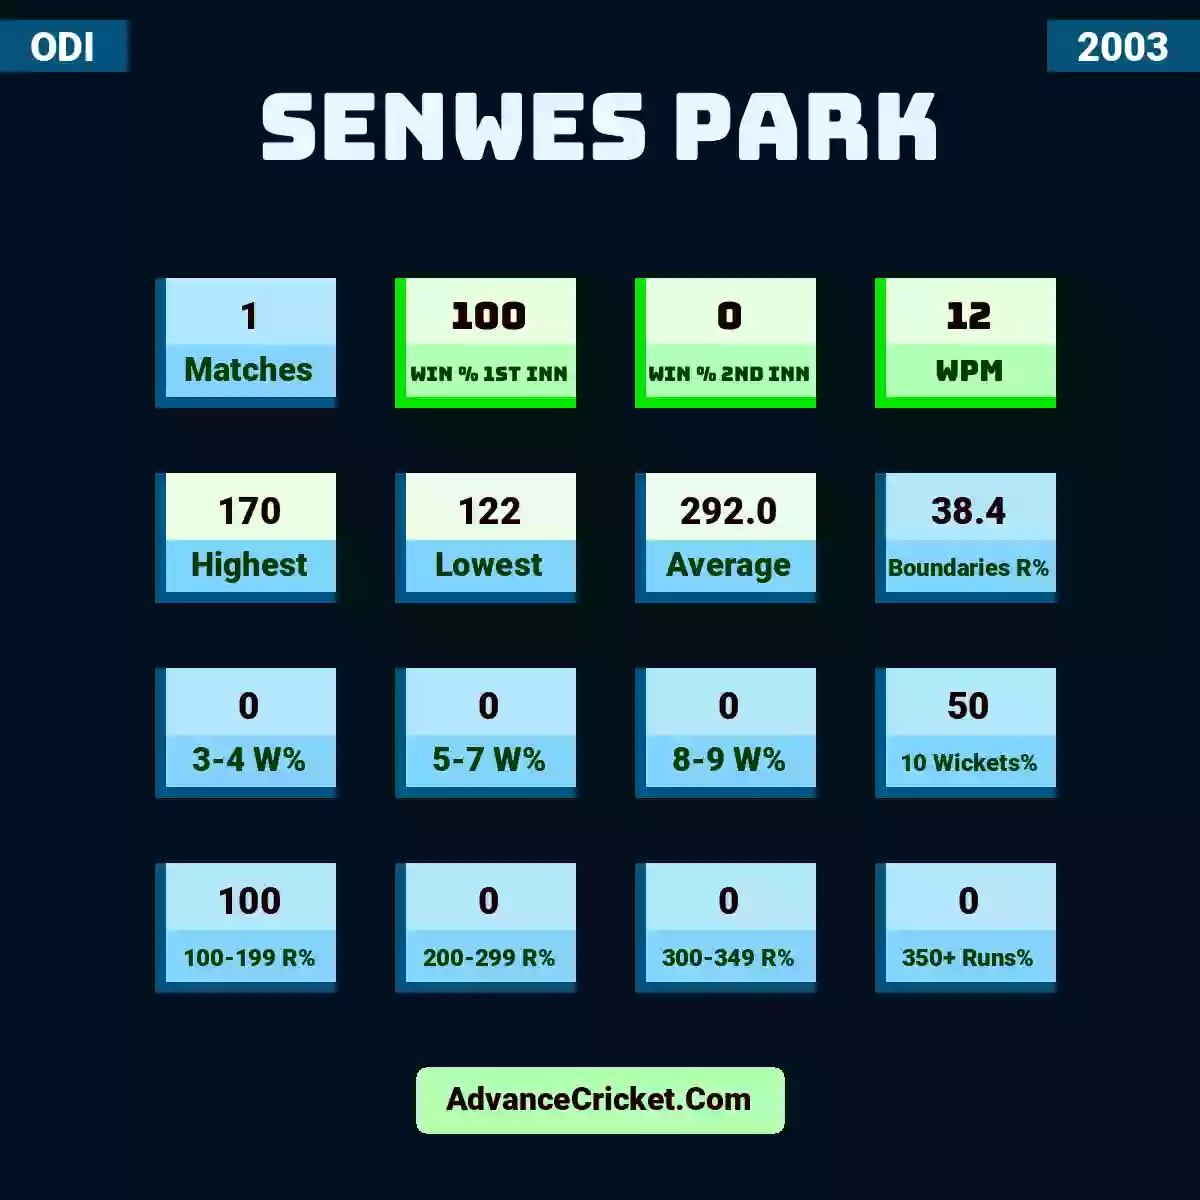 Image showing Senwes Park with Matches: 1, Win % 1st Inn: 100, Win % 2nd Inn: 0, WPM: 12, Highest: 170, Lowest: 122, Average: 292.0, Boundaries R%: 38.4, 3-4 W%: 0, 5-7 W%: 0, 8-9 W%: 0, 10 Wickets%: 50, 100-199 R%: 100, 200-299 R%: 0, 300-349 R%: 0, 350+ Runs%: 0.